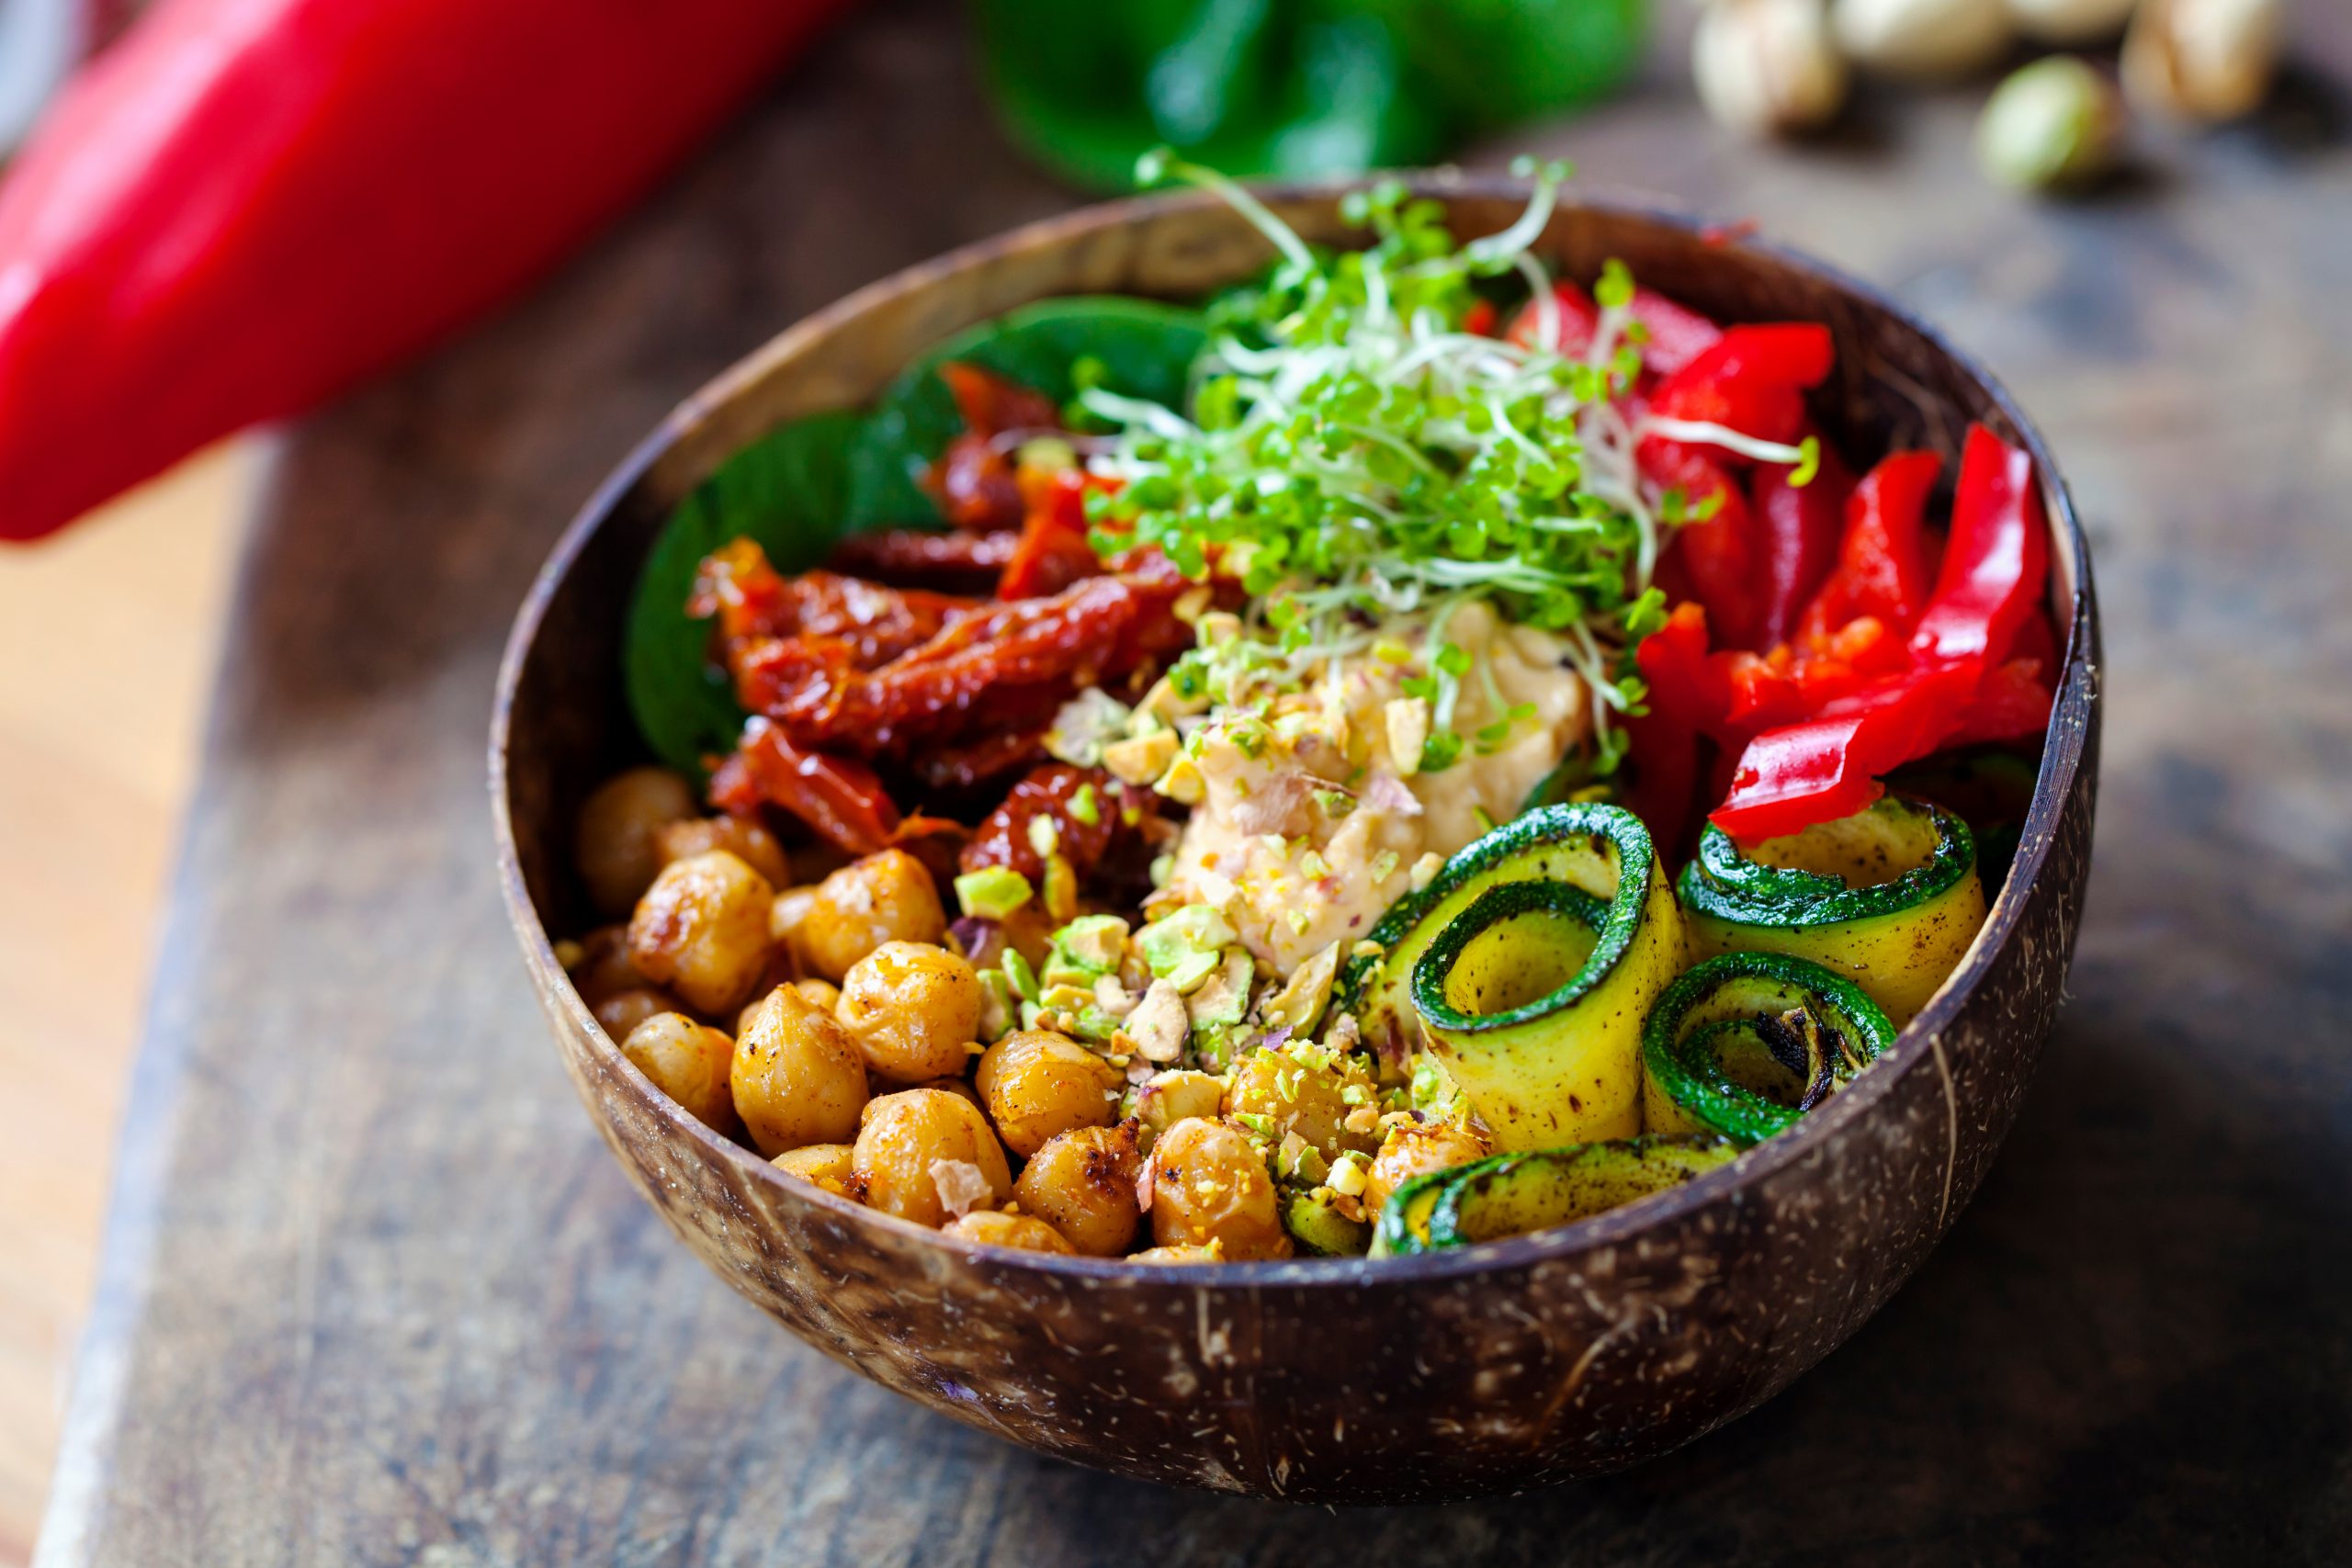 Quarter of millennials say COVID-19 has made vegan diet more appealing